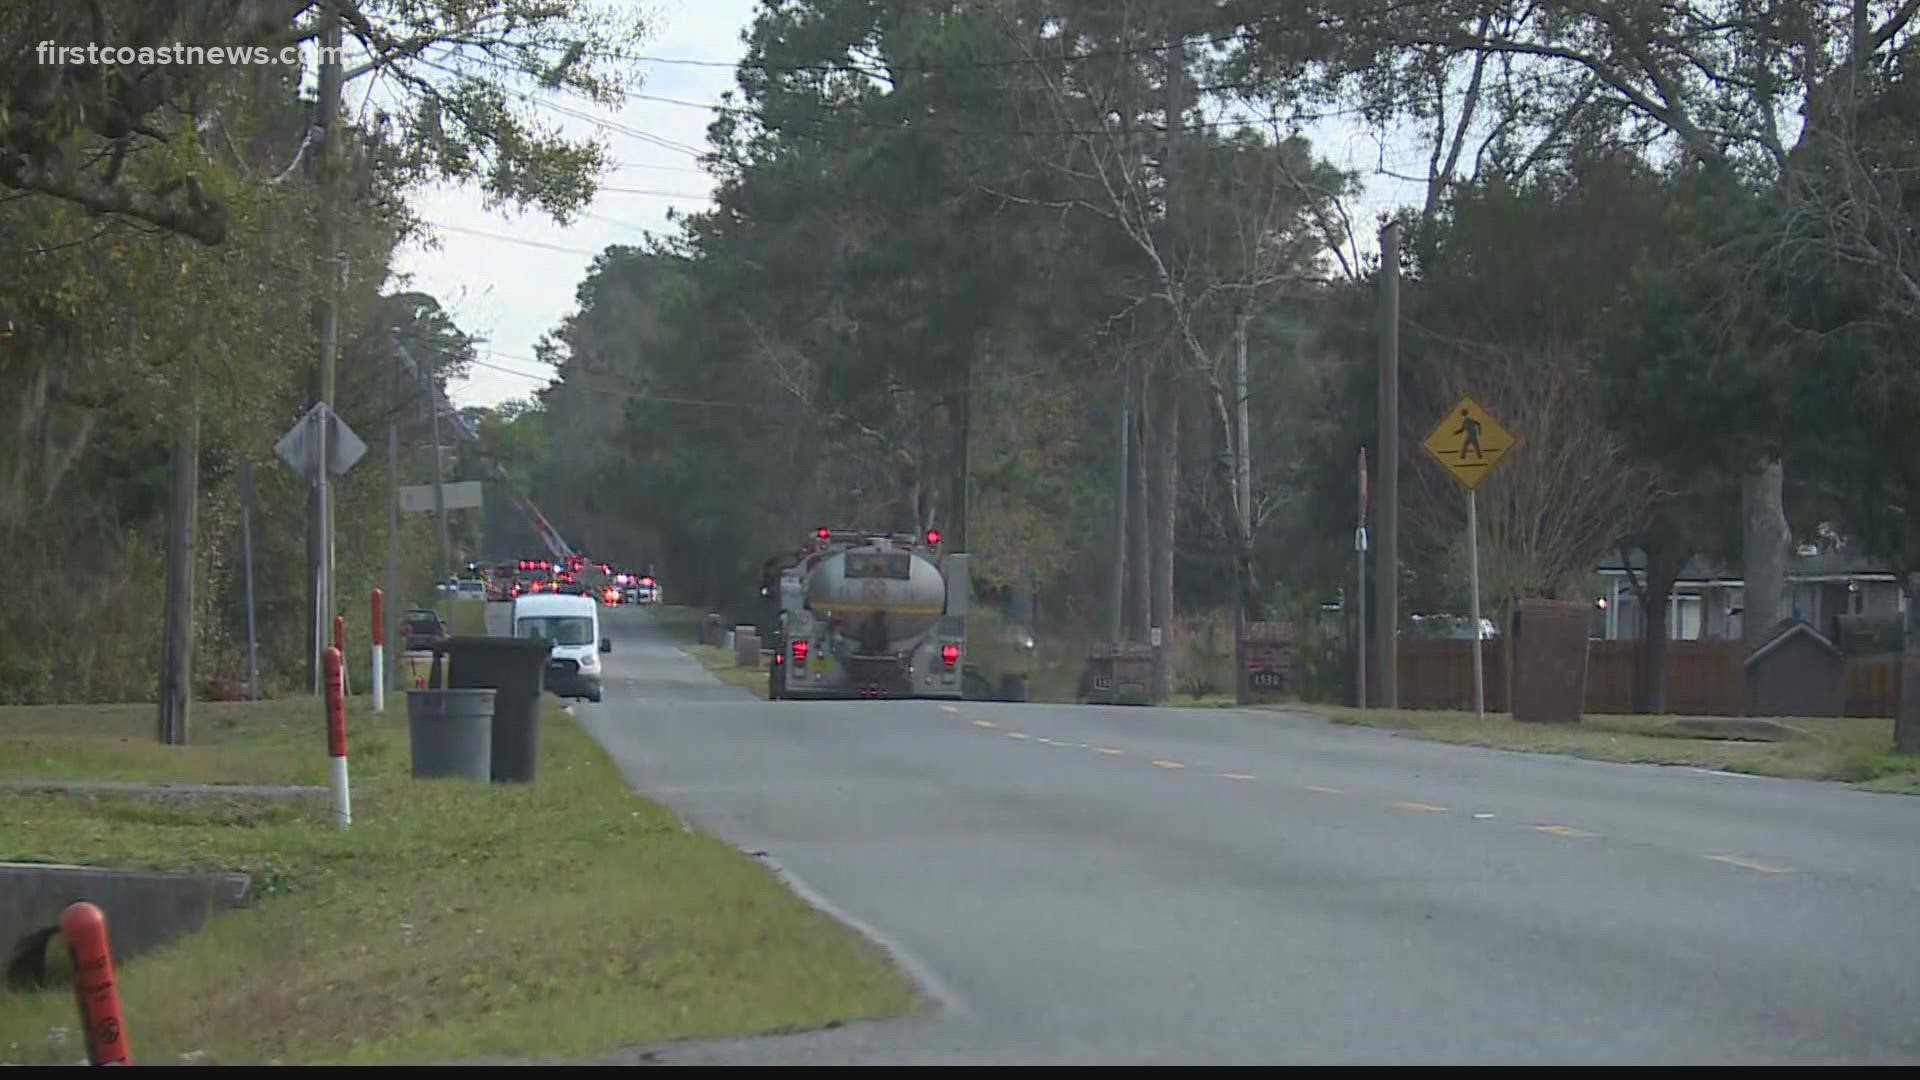 JFRD says the fire started around 4 p.m. Thursday in the 900 block of Bulls Bay Highway.